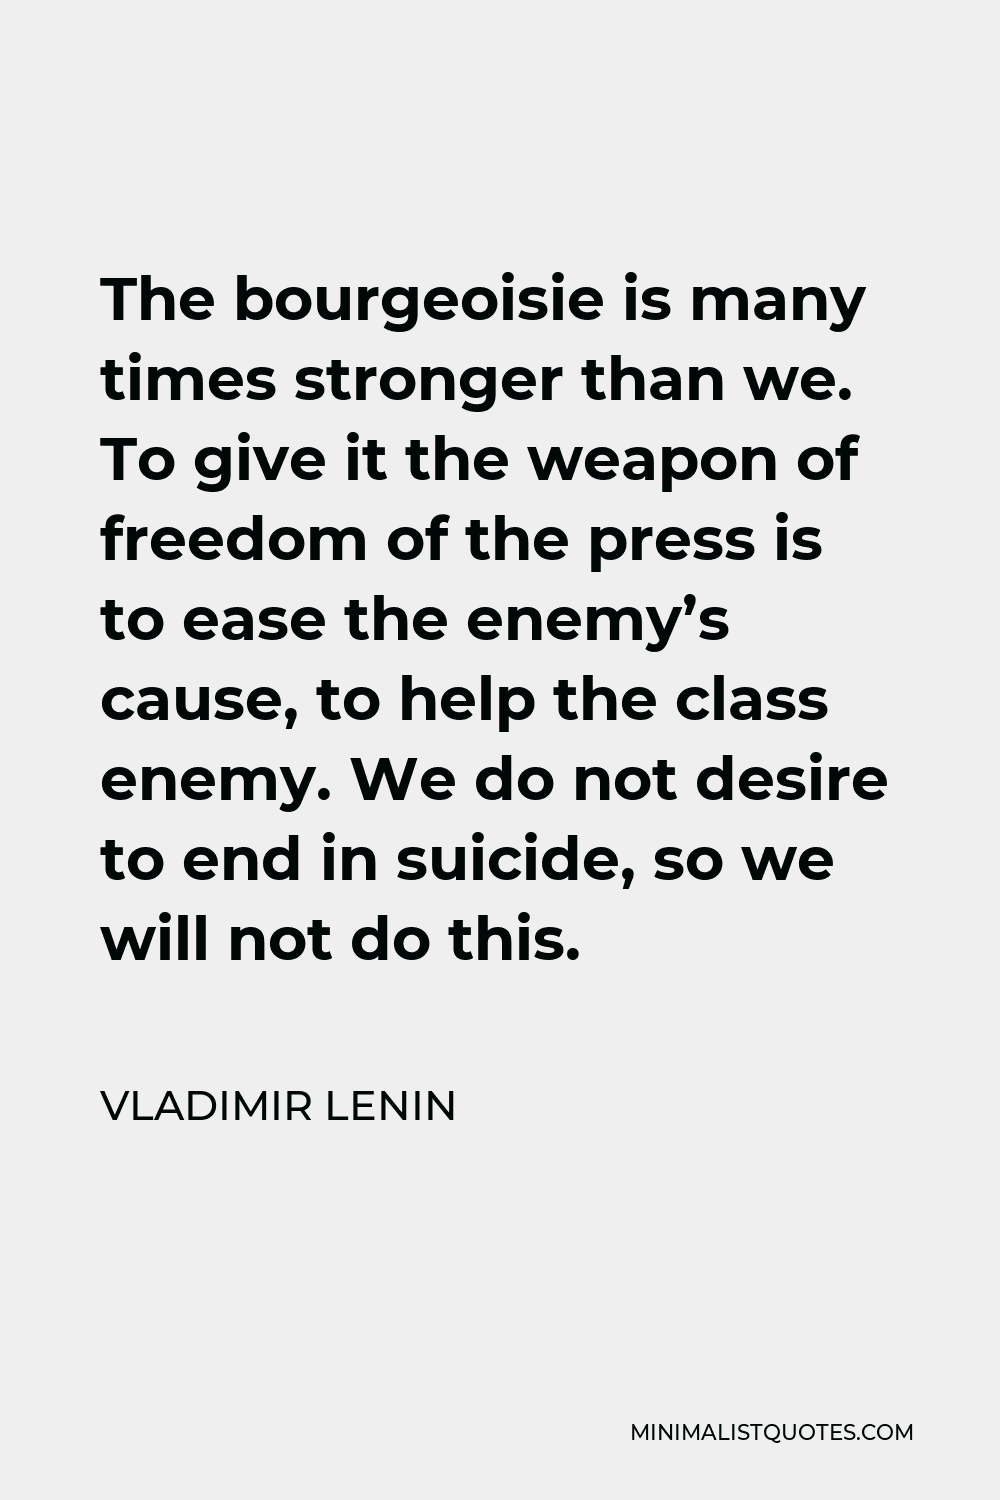 Vladimir Lenin Quote - The bourgeoisie is many times stronger than we. To give it the weapon of freedom of the press is to ease the enemy’s cause, to help the class enemy. We do not desire to end in suicide, so we will not do this.